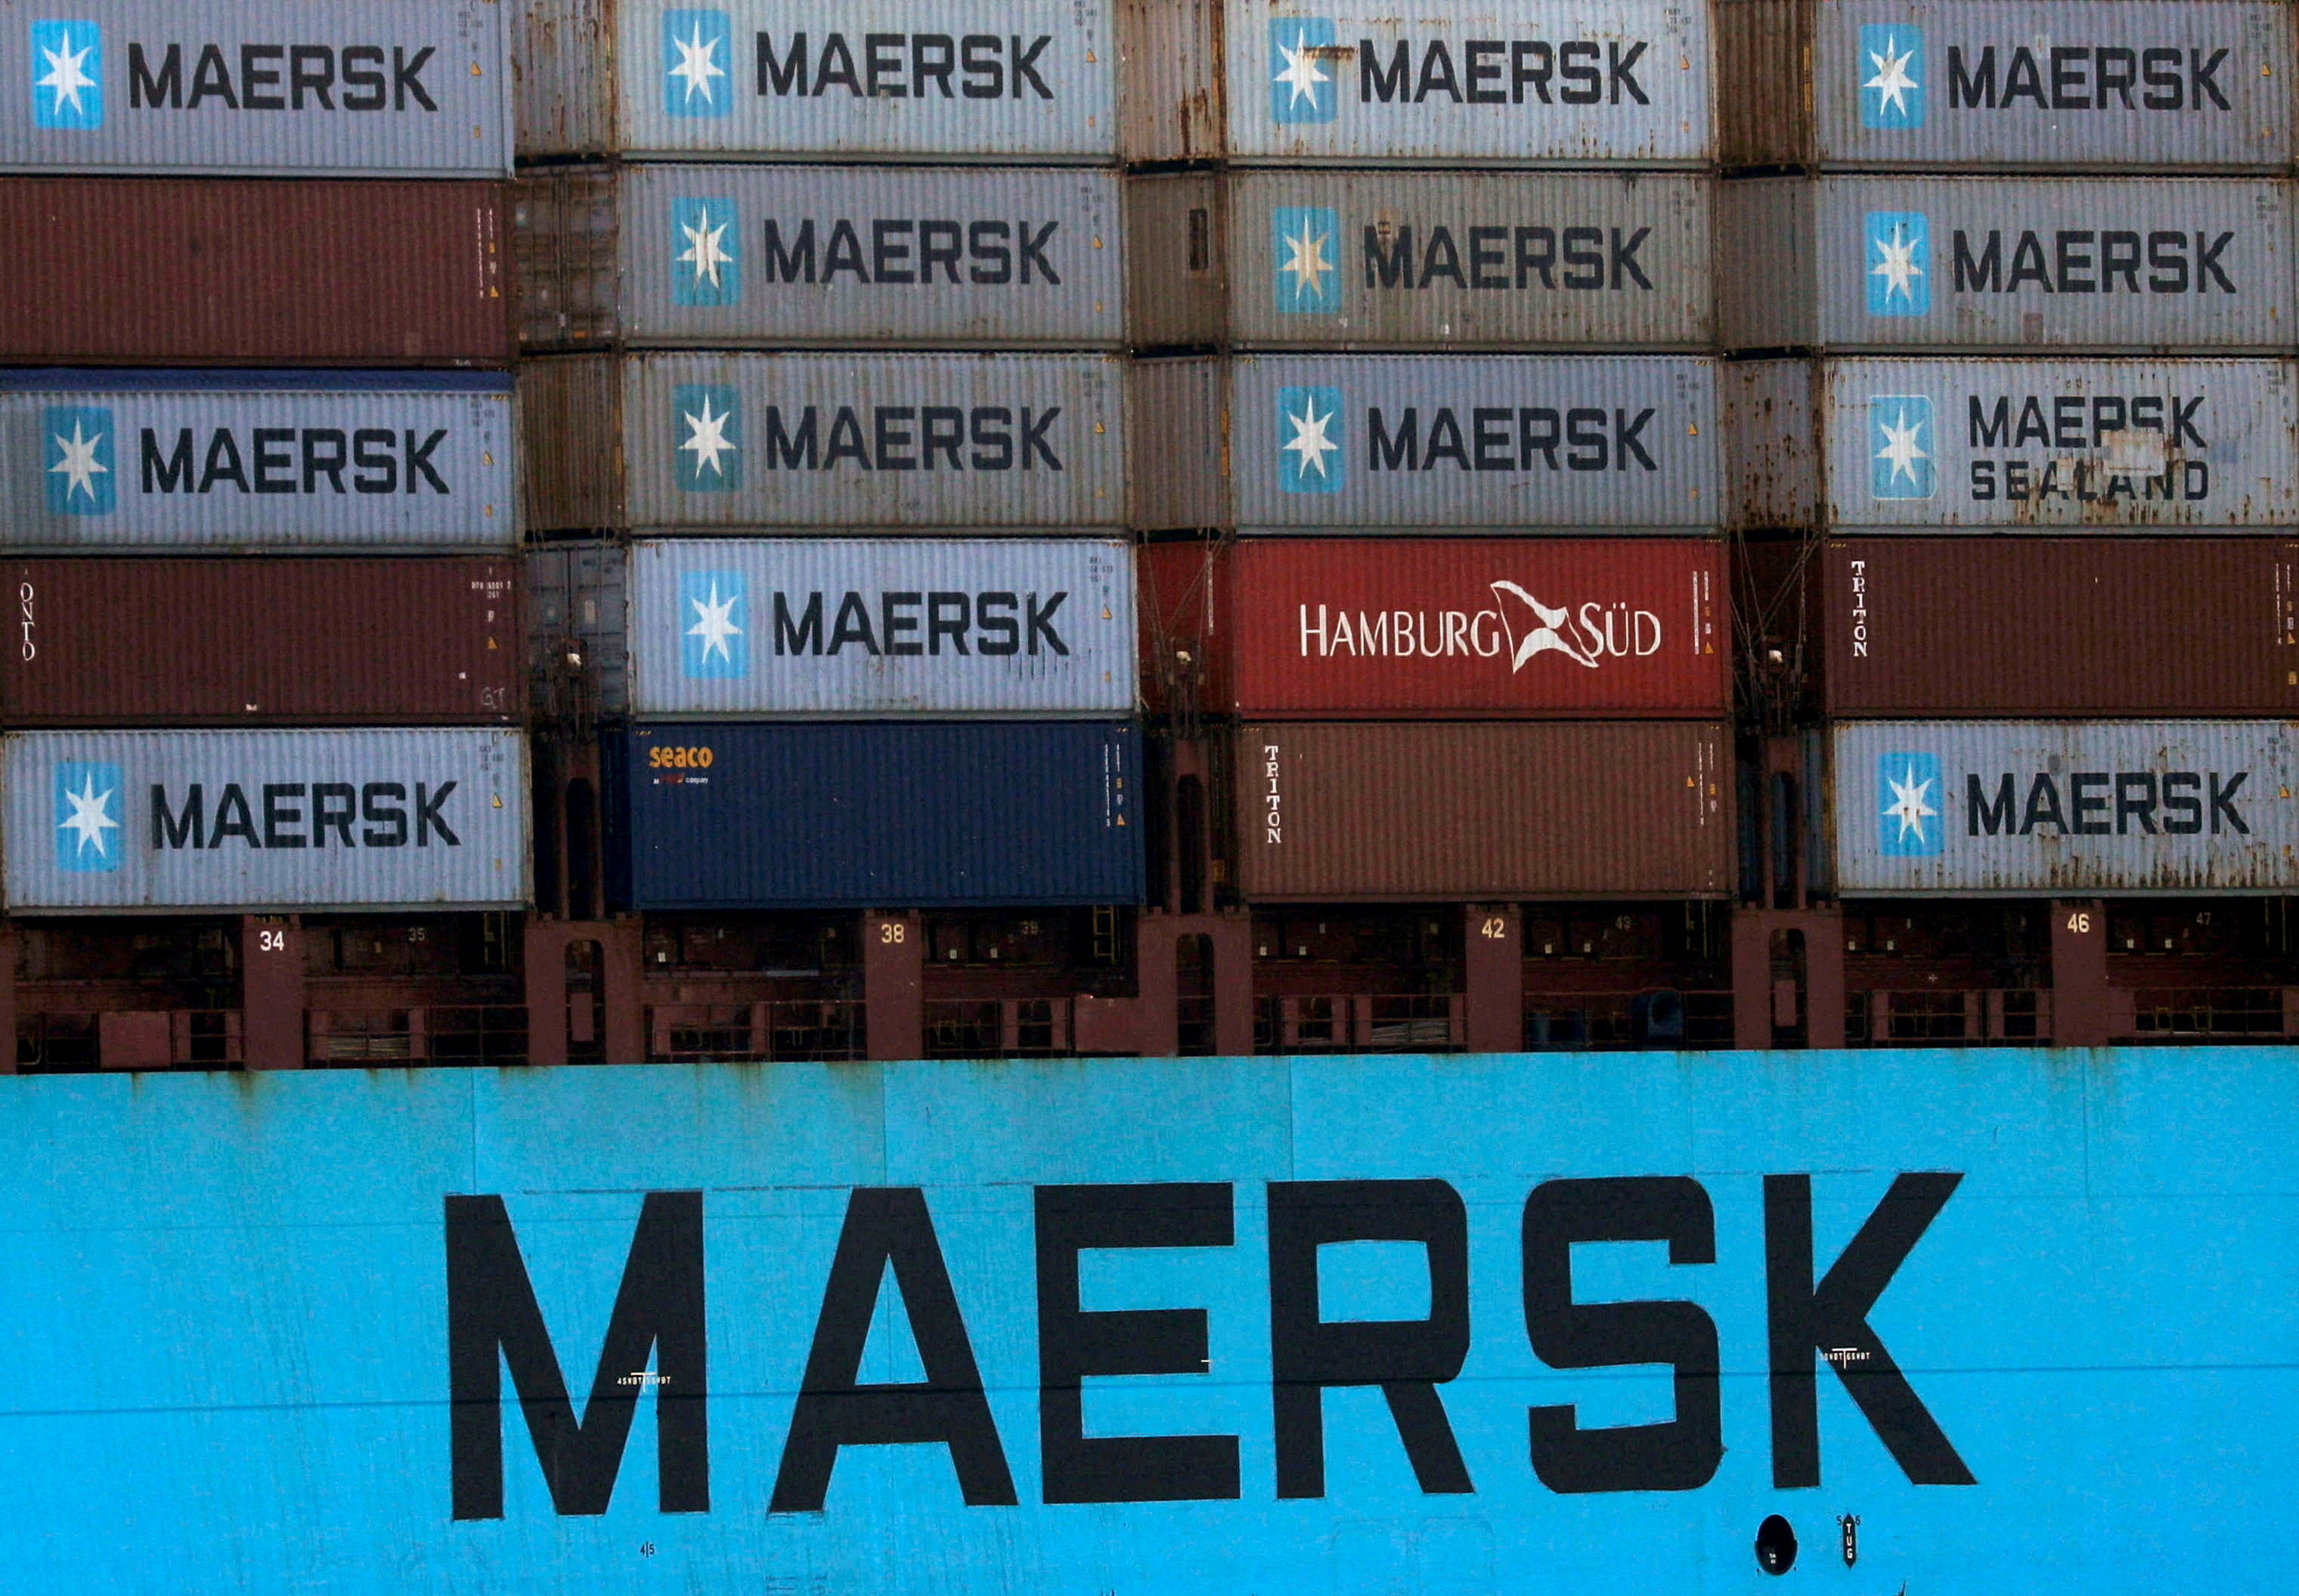 A Maersk container ship in the Suez Canal